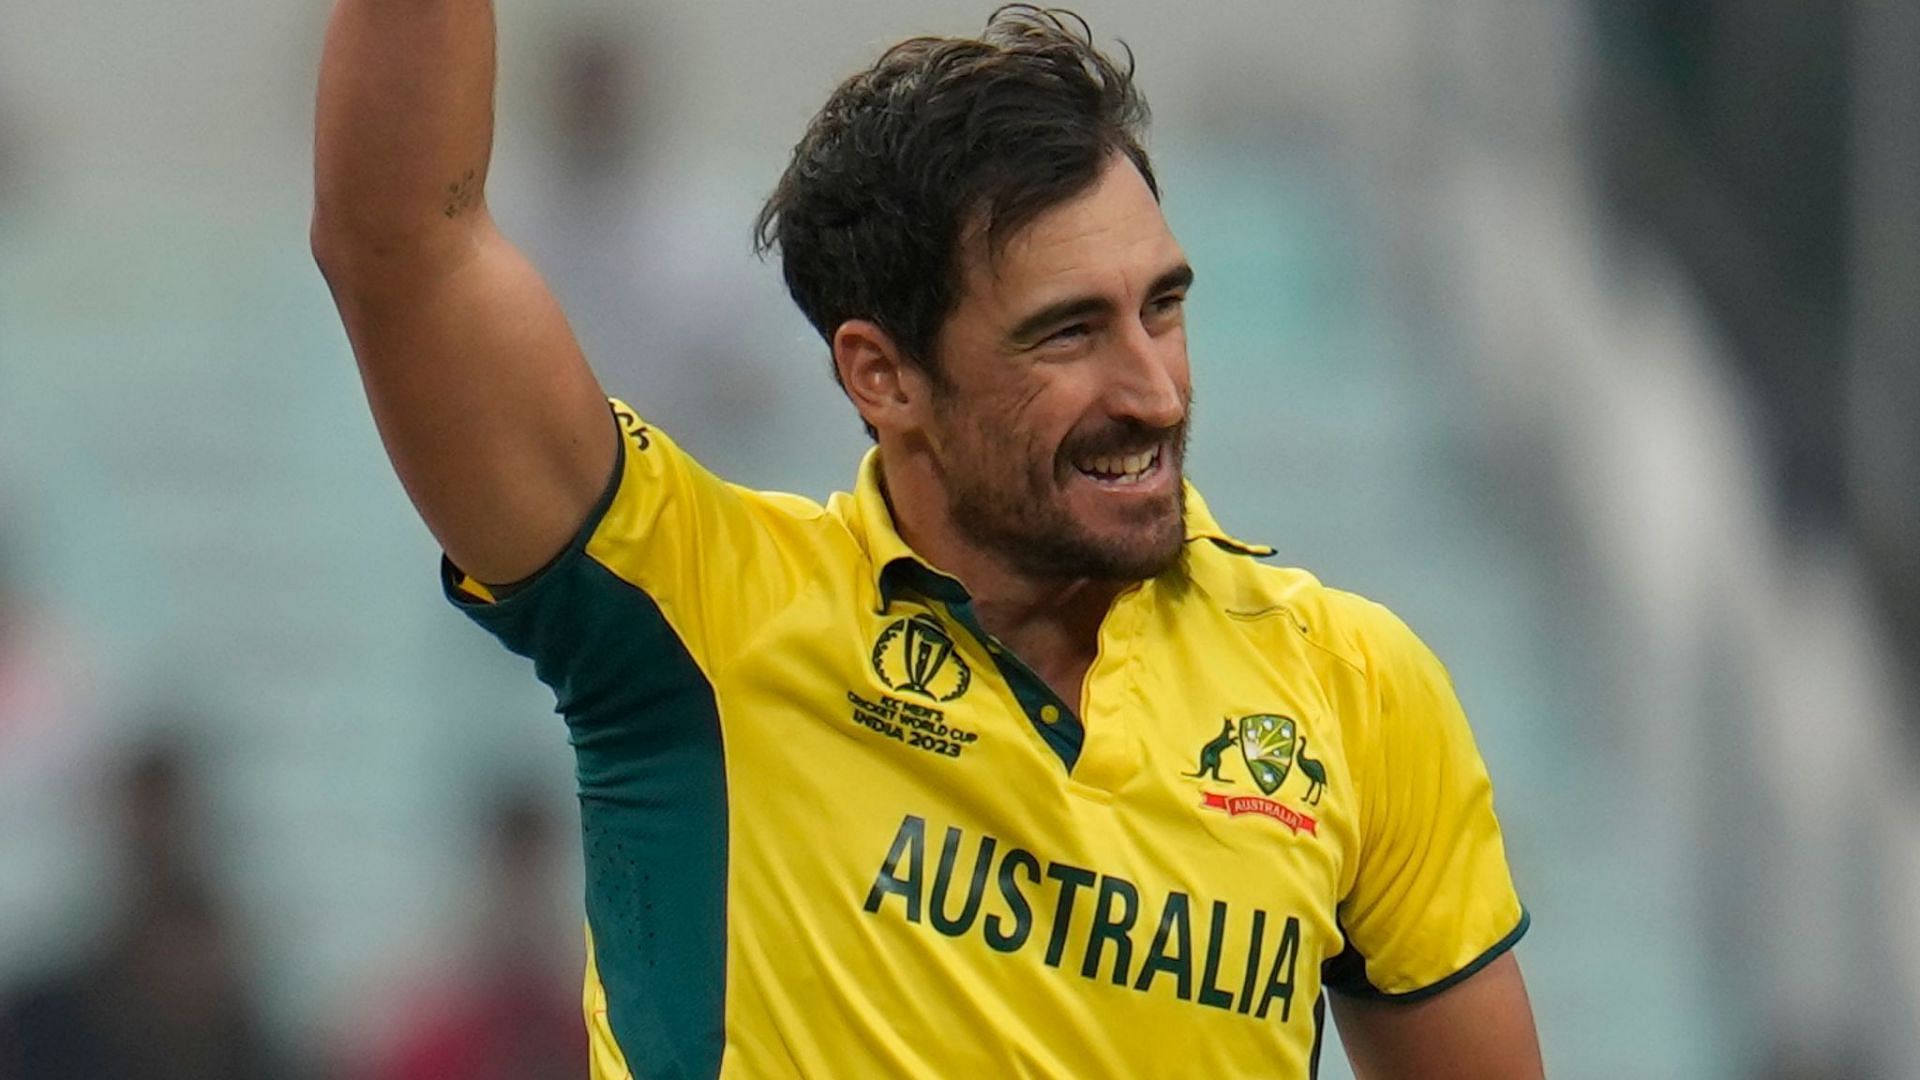 Mitchell Starc surpasses Cummins' record to the most expensive